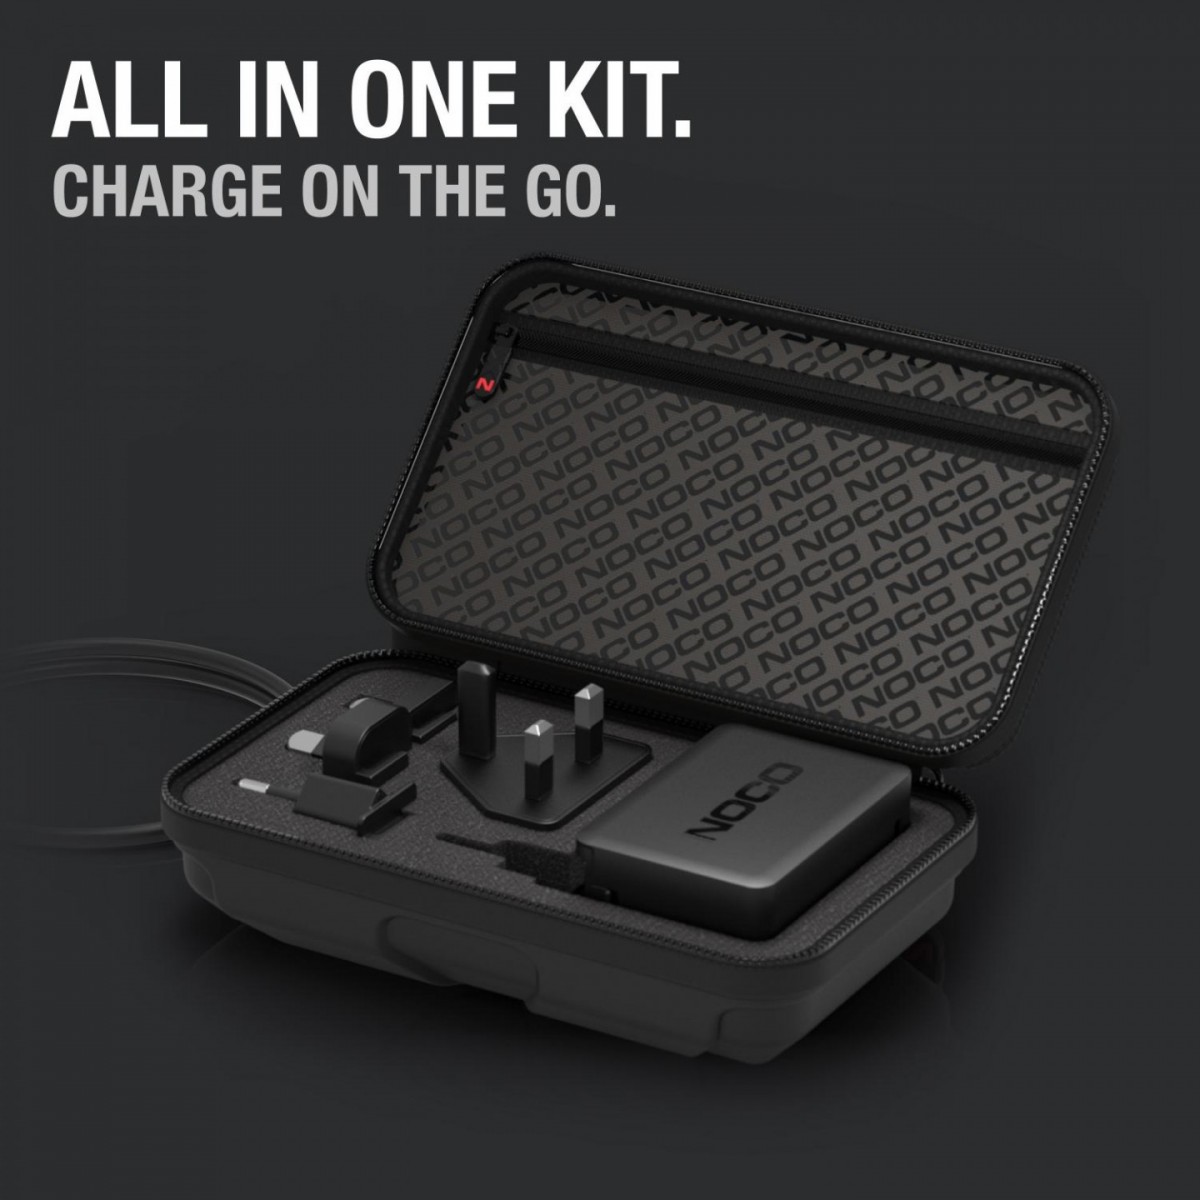 u65-main-5-all-in-one-kit-charge-on-the-go-1